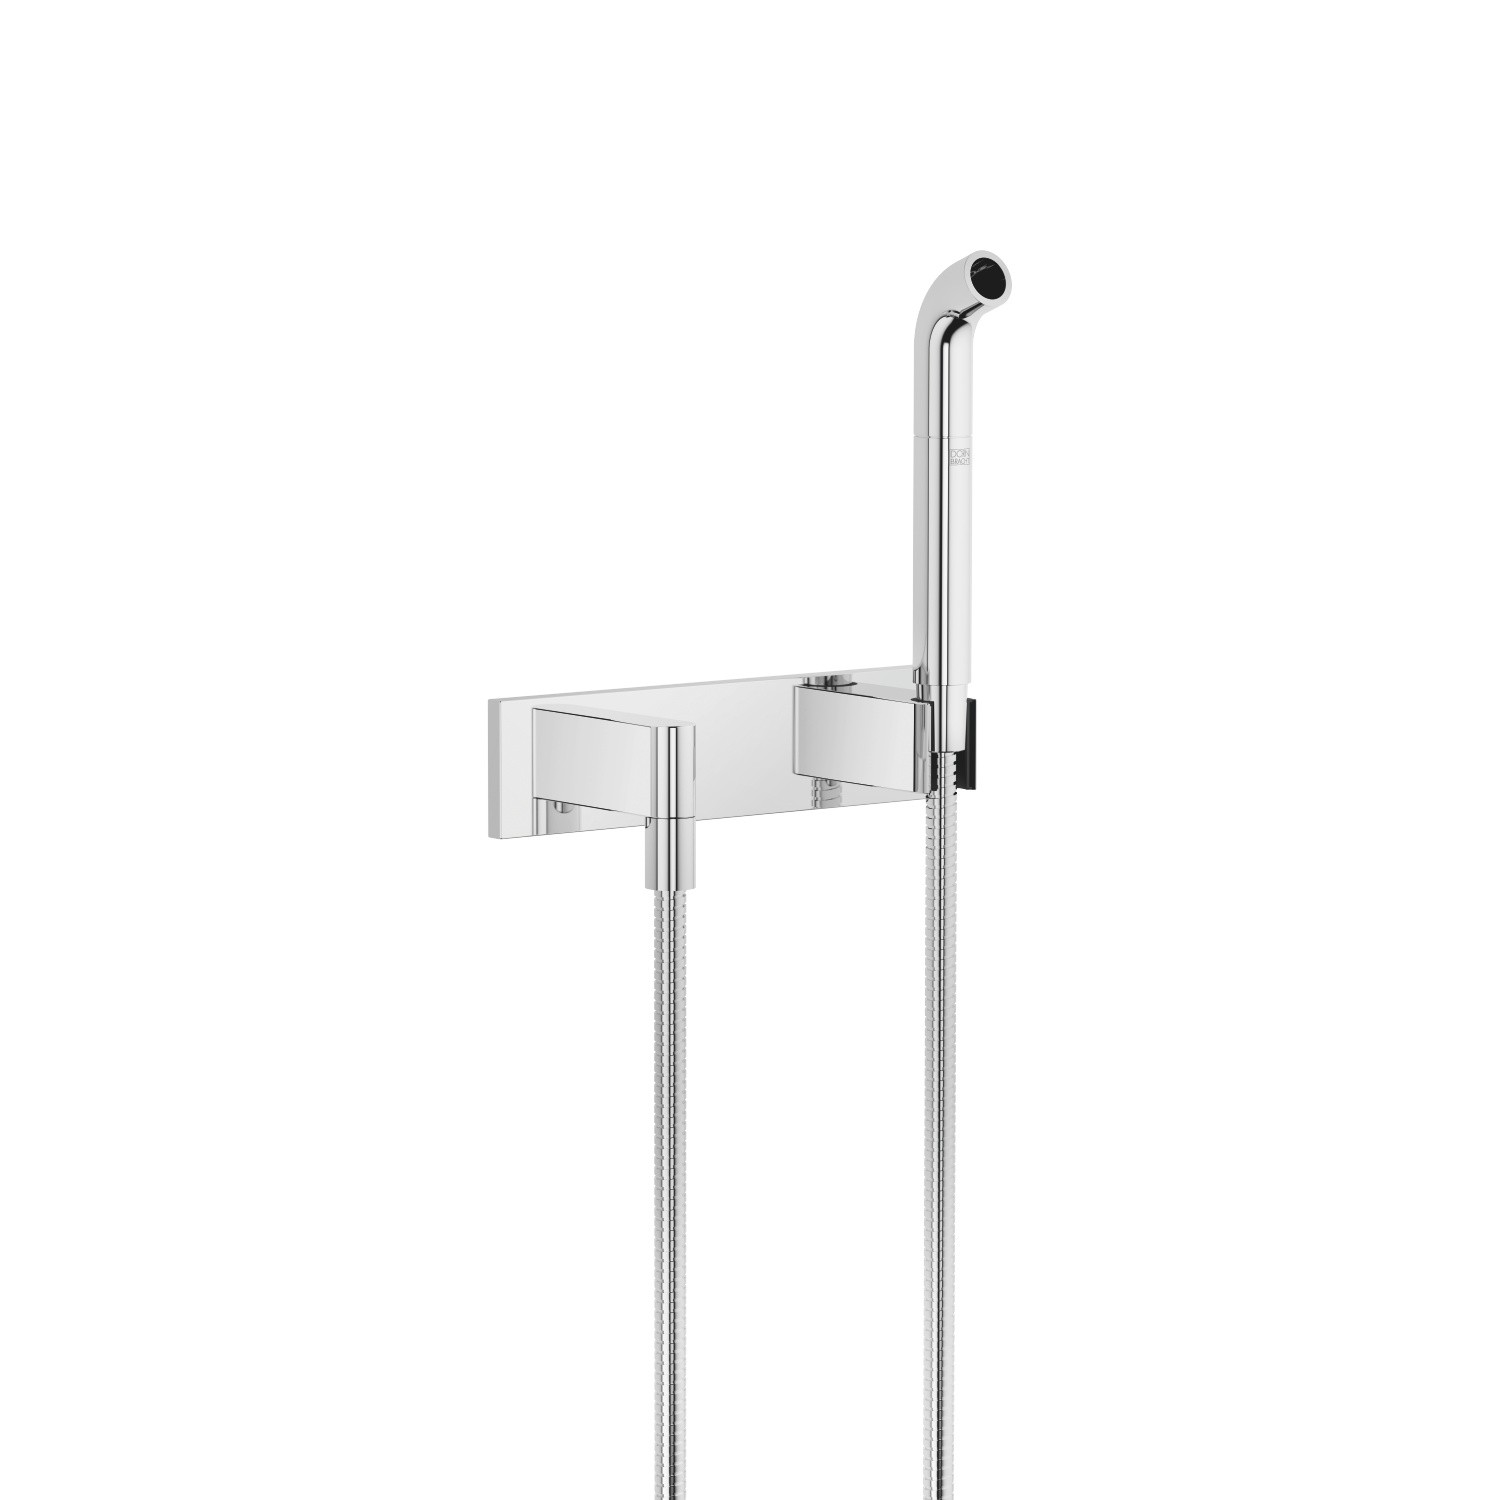 DORNBRACHT 27848979-0010 1.8 GPM WALL MOUNT AFFUSION PIPE HAND SHOWER FOR KNEIPP TREATMENTS WITH COVER PLATE